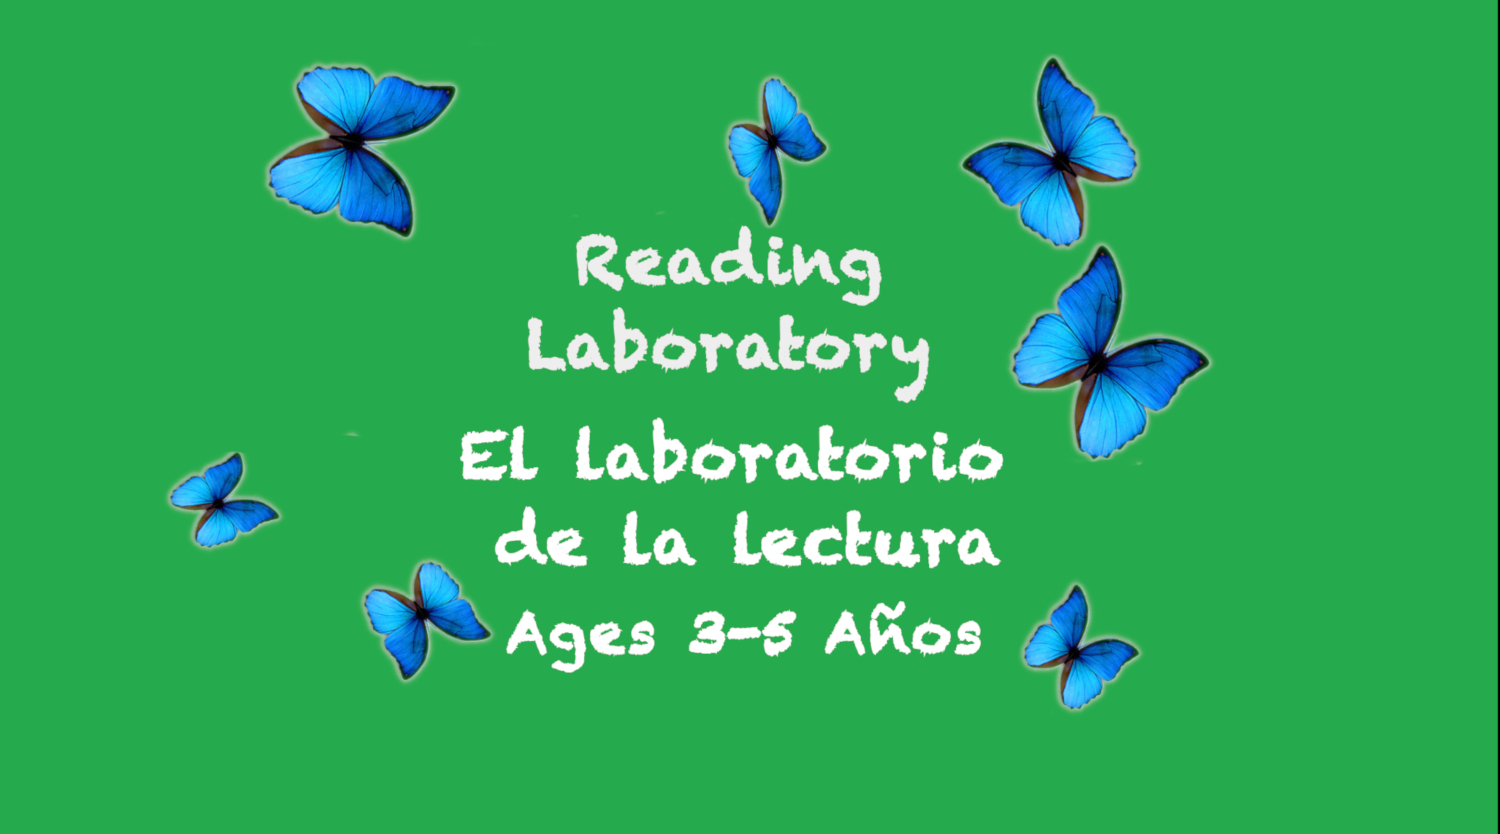 Reading Laboratory for 3 to 5 year olds